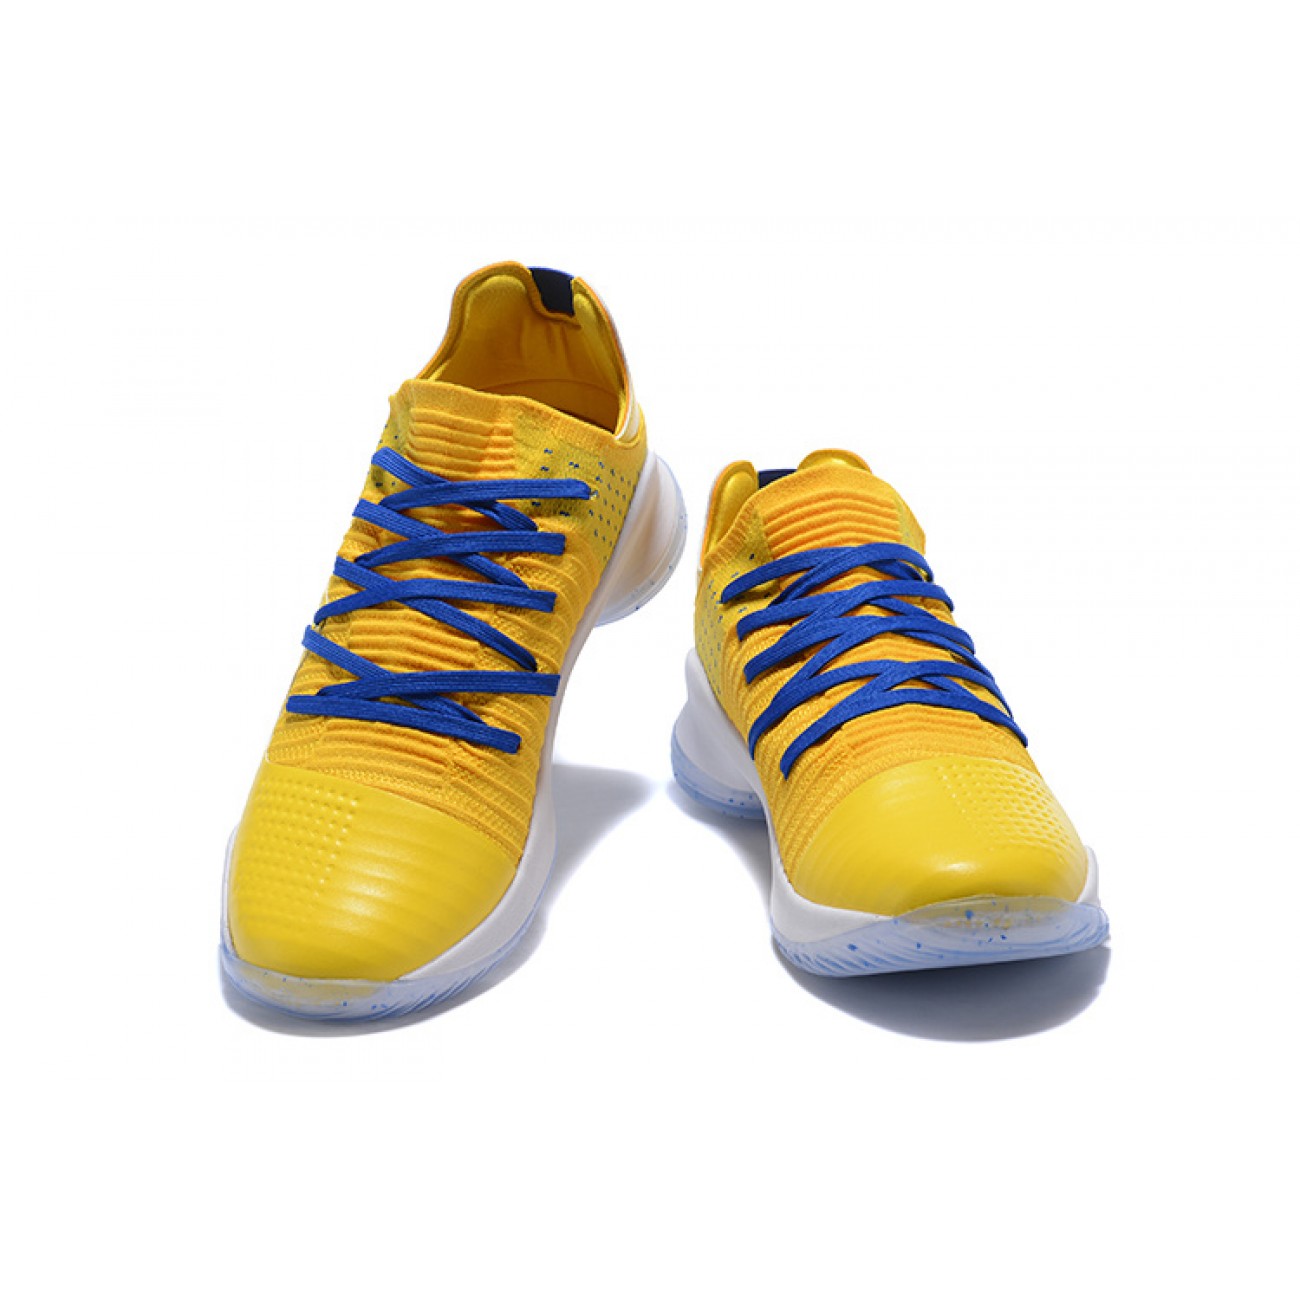 Under Armour UA Curry 4 Low Yellow/Blue